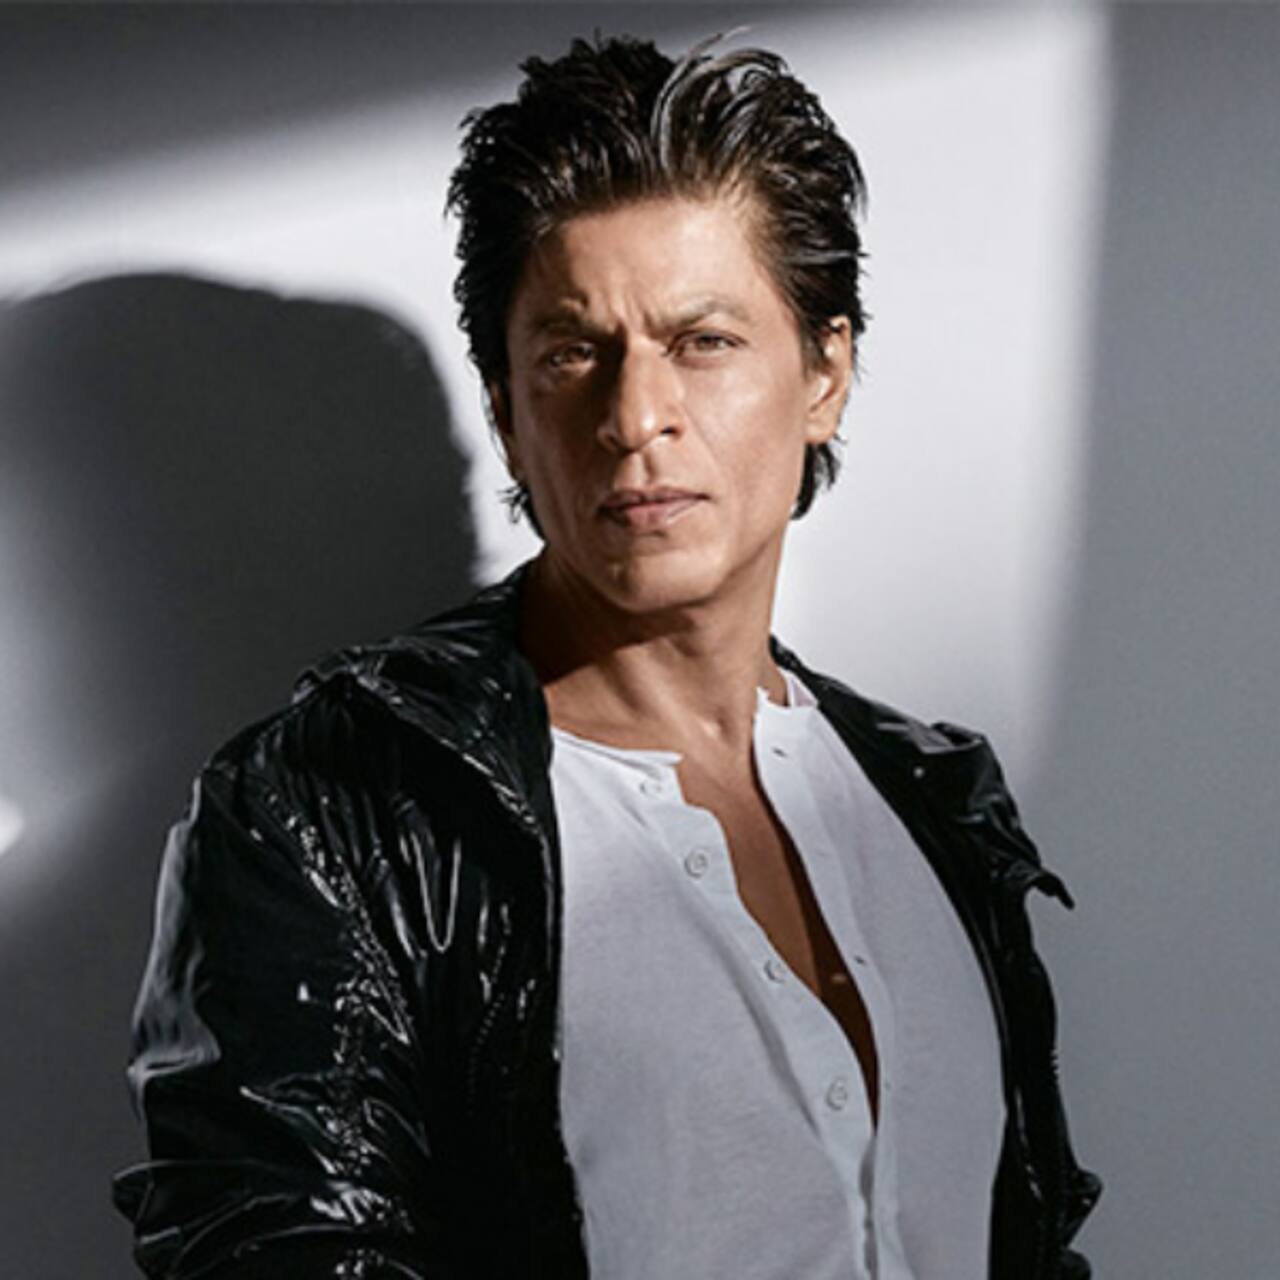 Shah Rukh Khan all set to spice up the OTT space by the end of 2021? Here’s what we know